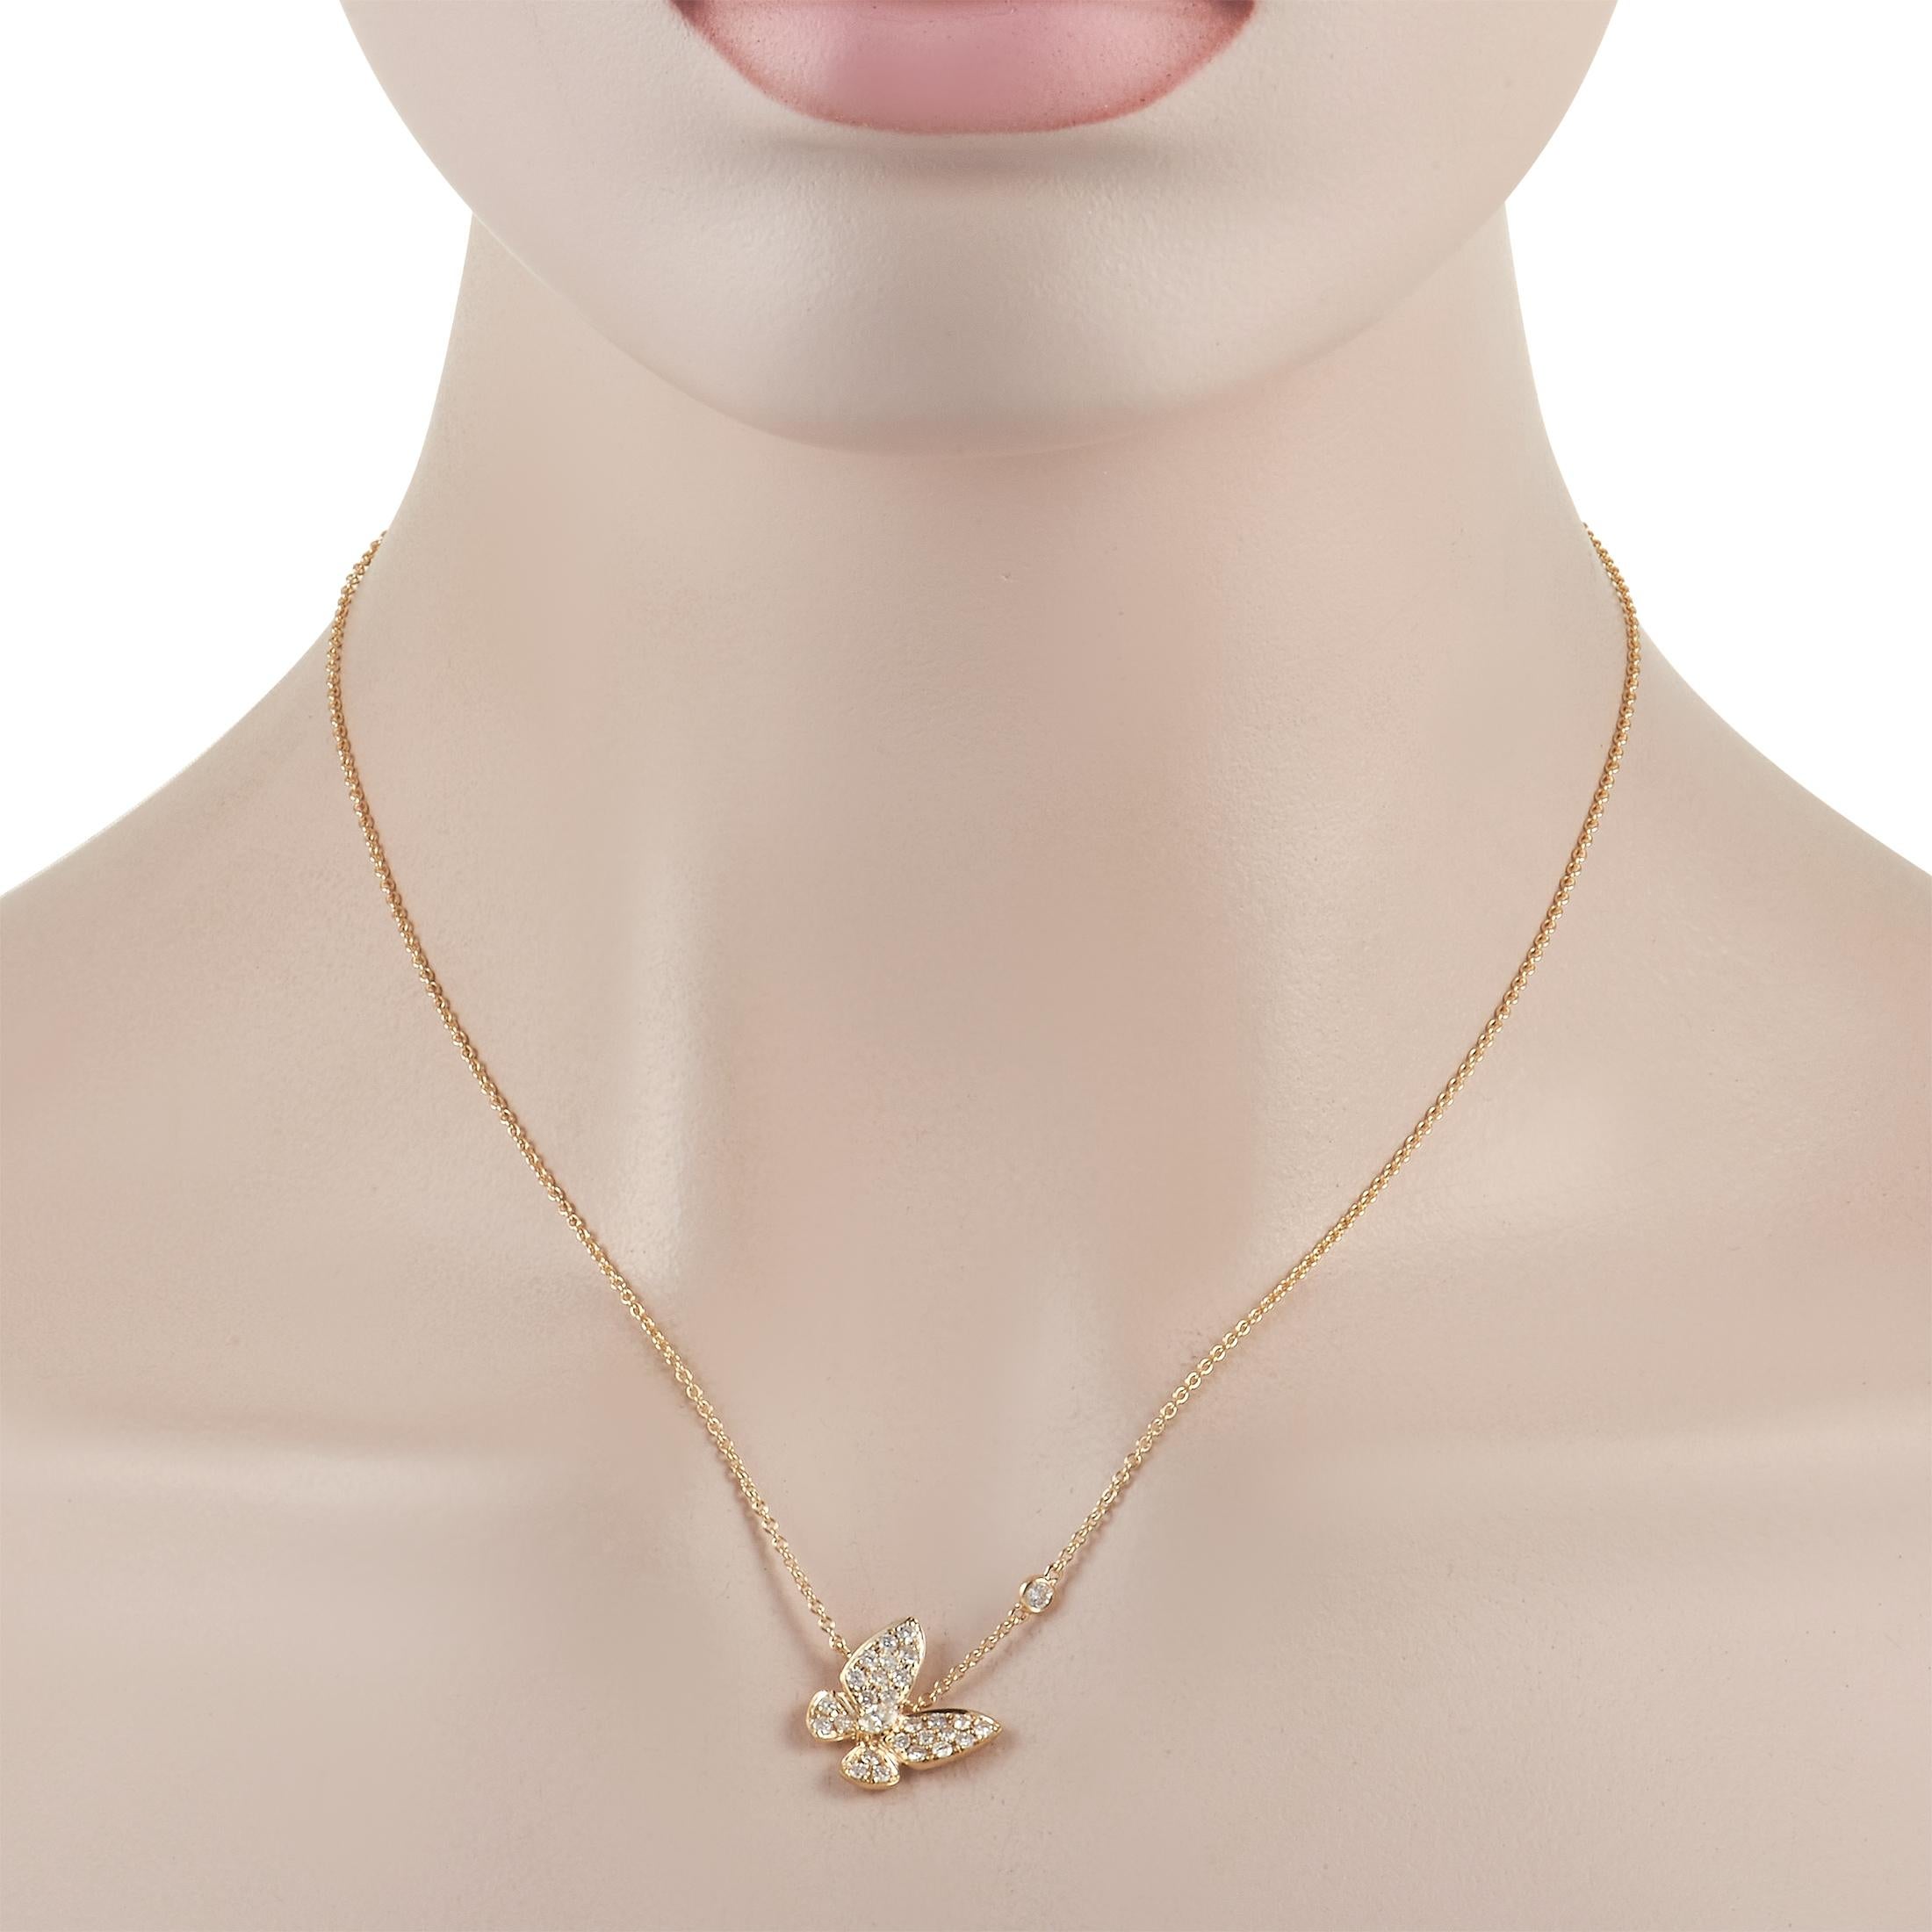 This lovely LB Exclusive 18K Yellow Gold 0.75 ct Diamond Butterfly Necklace is full of charm! It features a yellow gold chain that places the focus on the matching 18K yellow gold butterfly pendant. The wings of the butterfly are set with round-cut